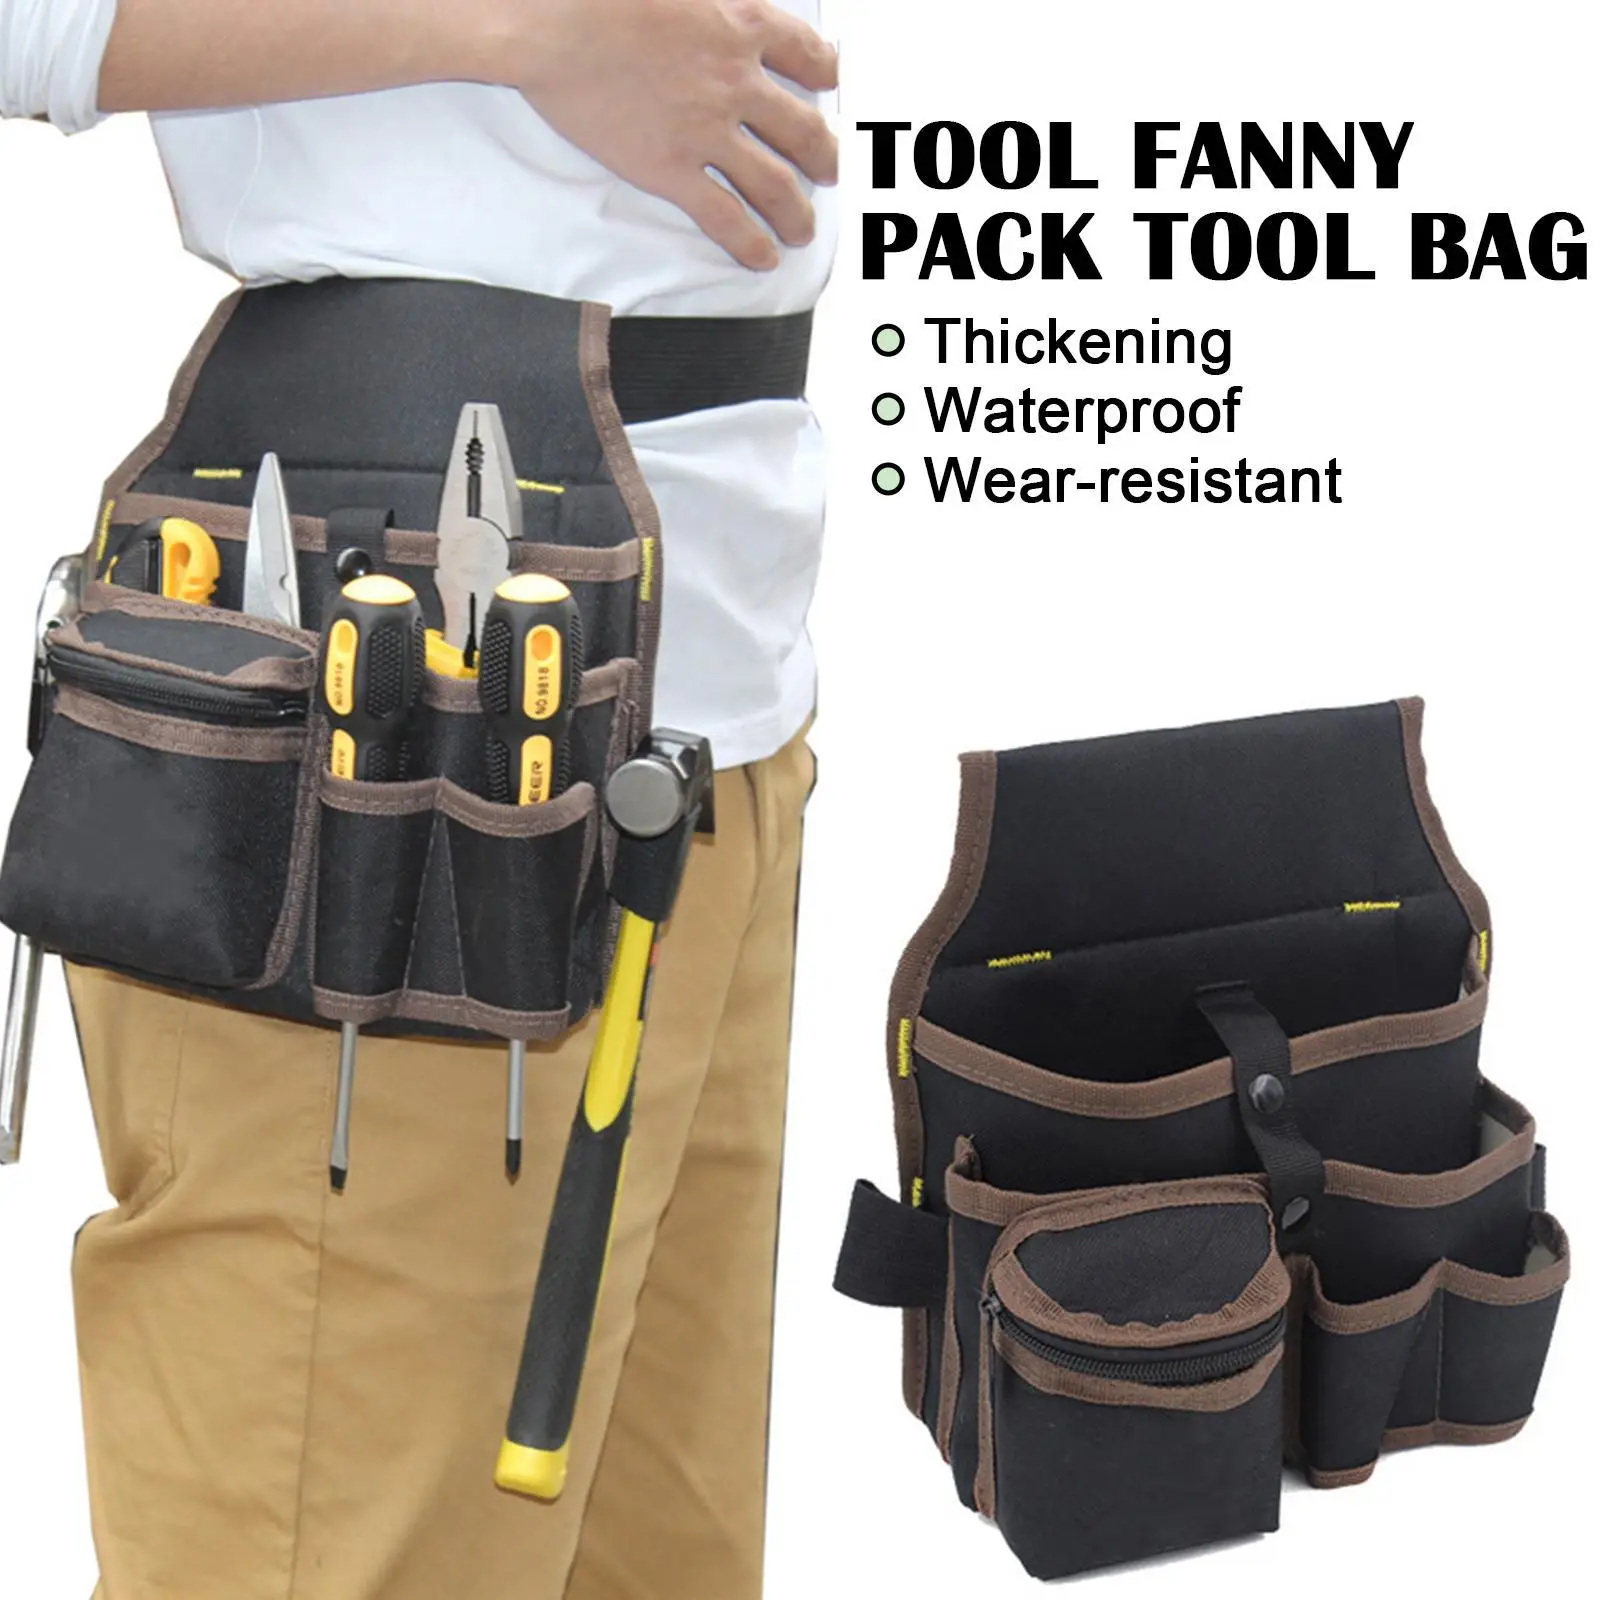 

9 in 1 Tool Belt Screwdriver Utility Kit Holder Top Quality polyesterFabric Tool Bag Electrician Waist Pocket Pouch Bag